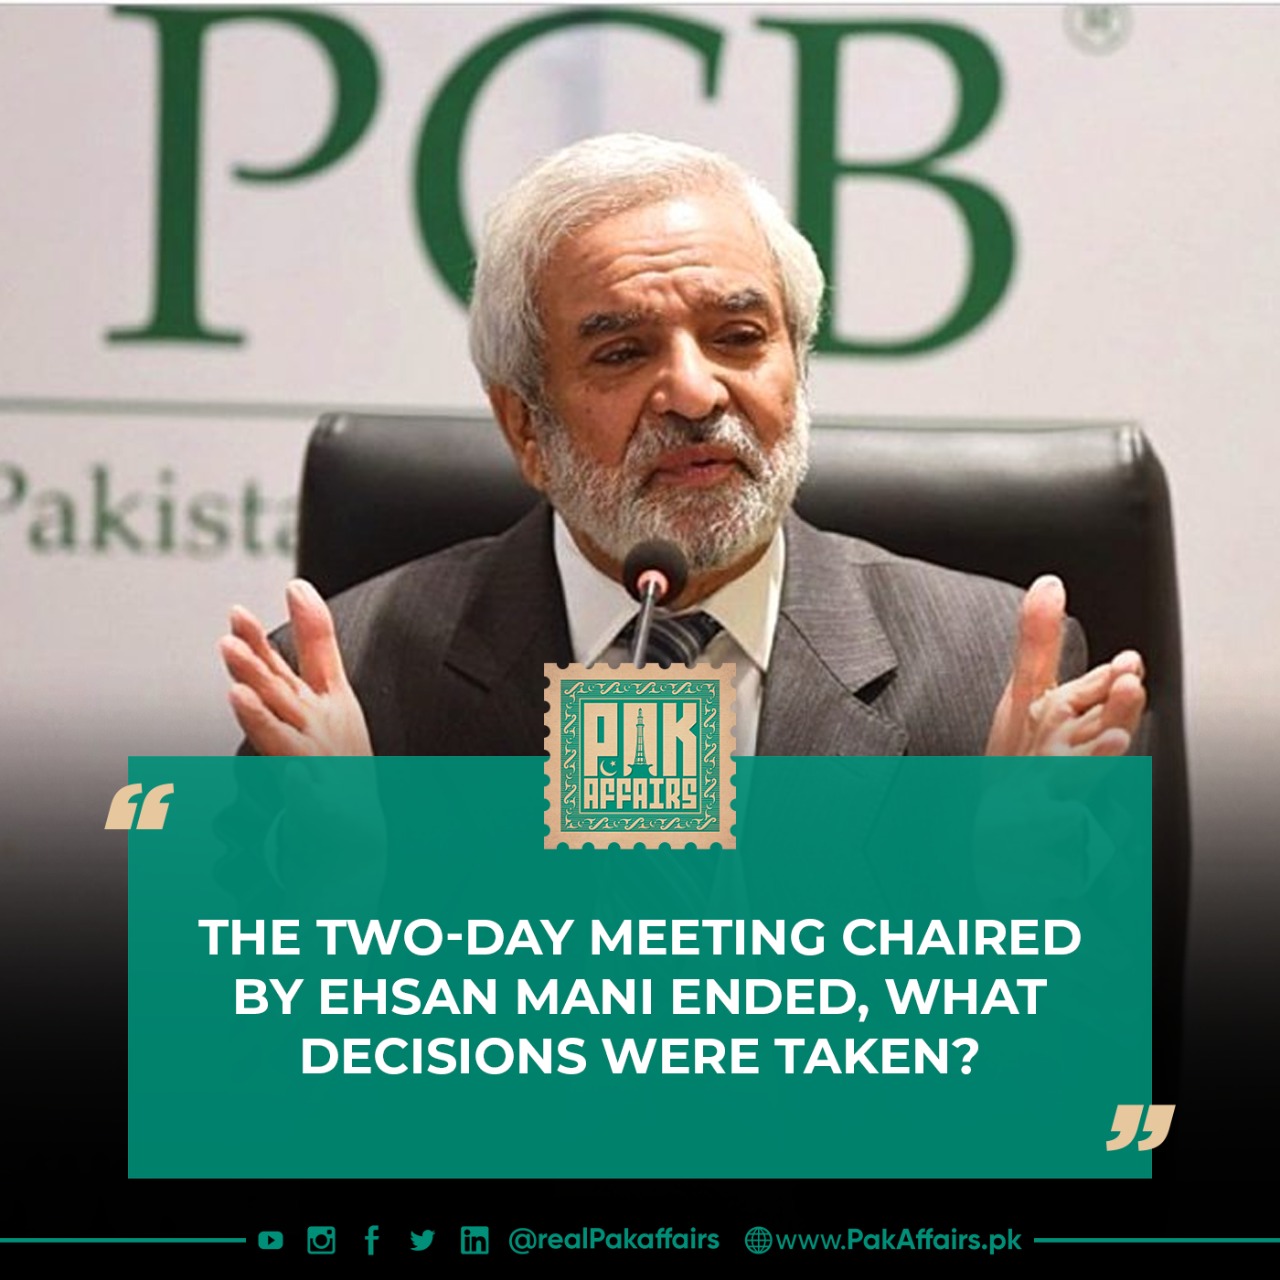 The two-day meeting chaired by Ehsan Mani ended, what decisions were taken?